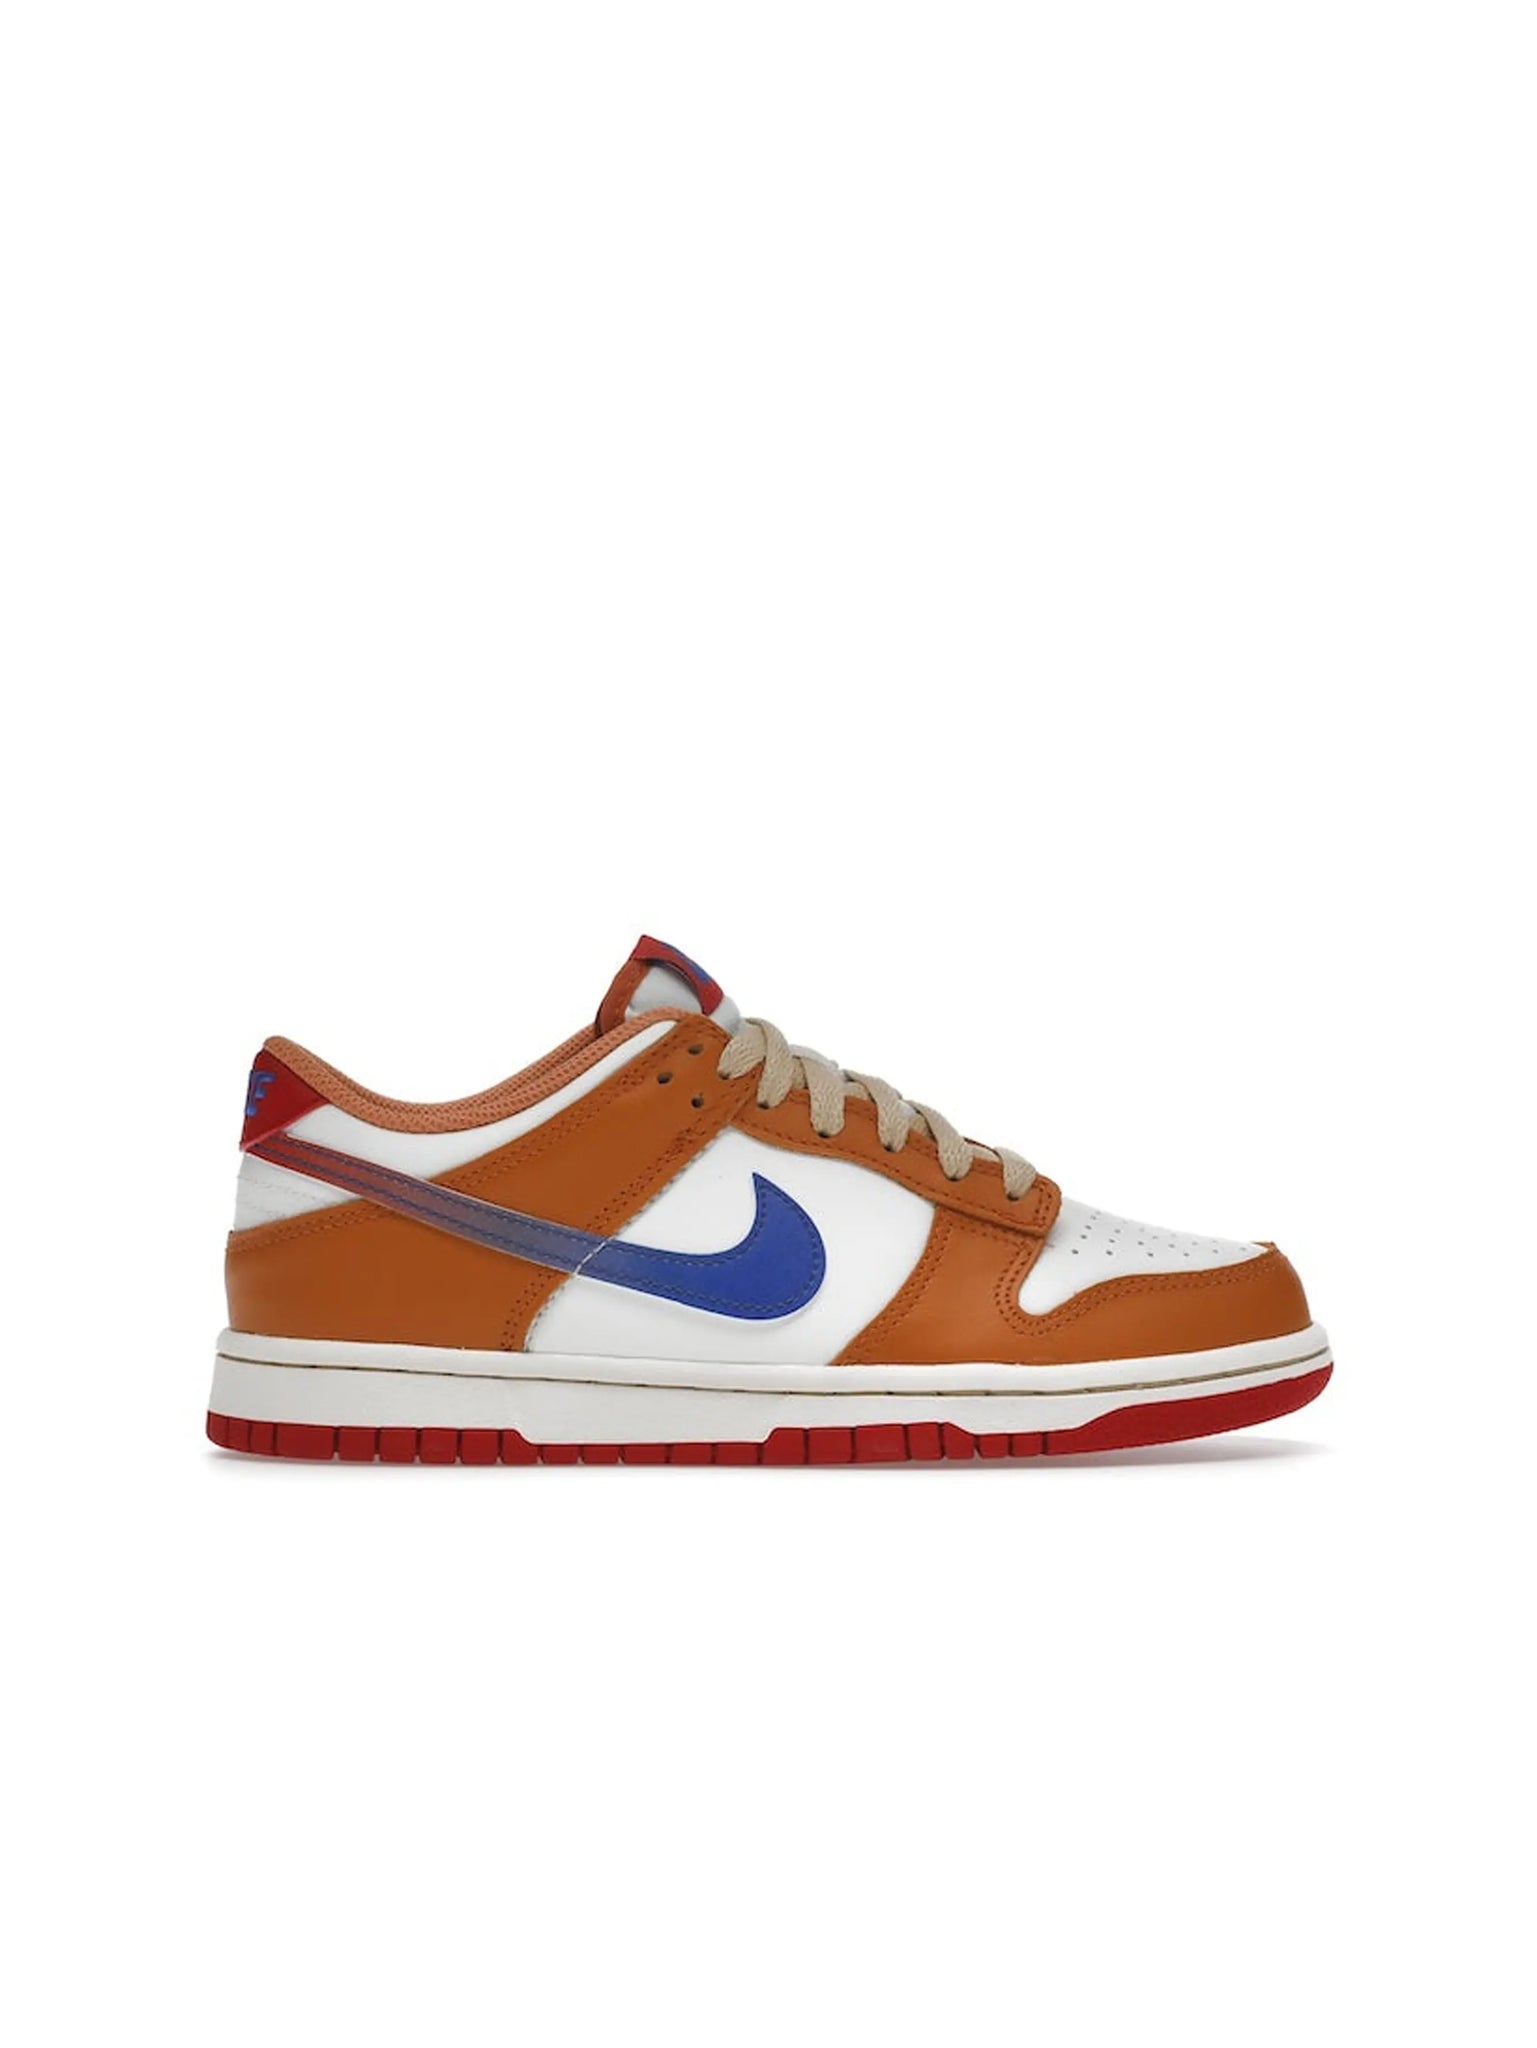 Nike Dunk Low Hot Curry Game Royal (GS) in Auckland, New Zealand - Shop name